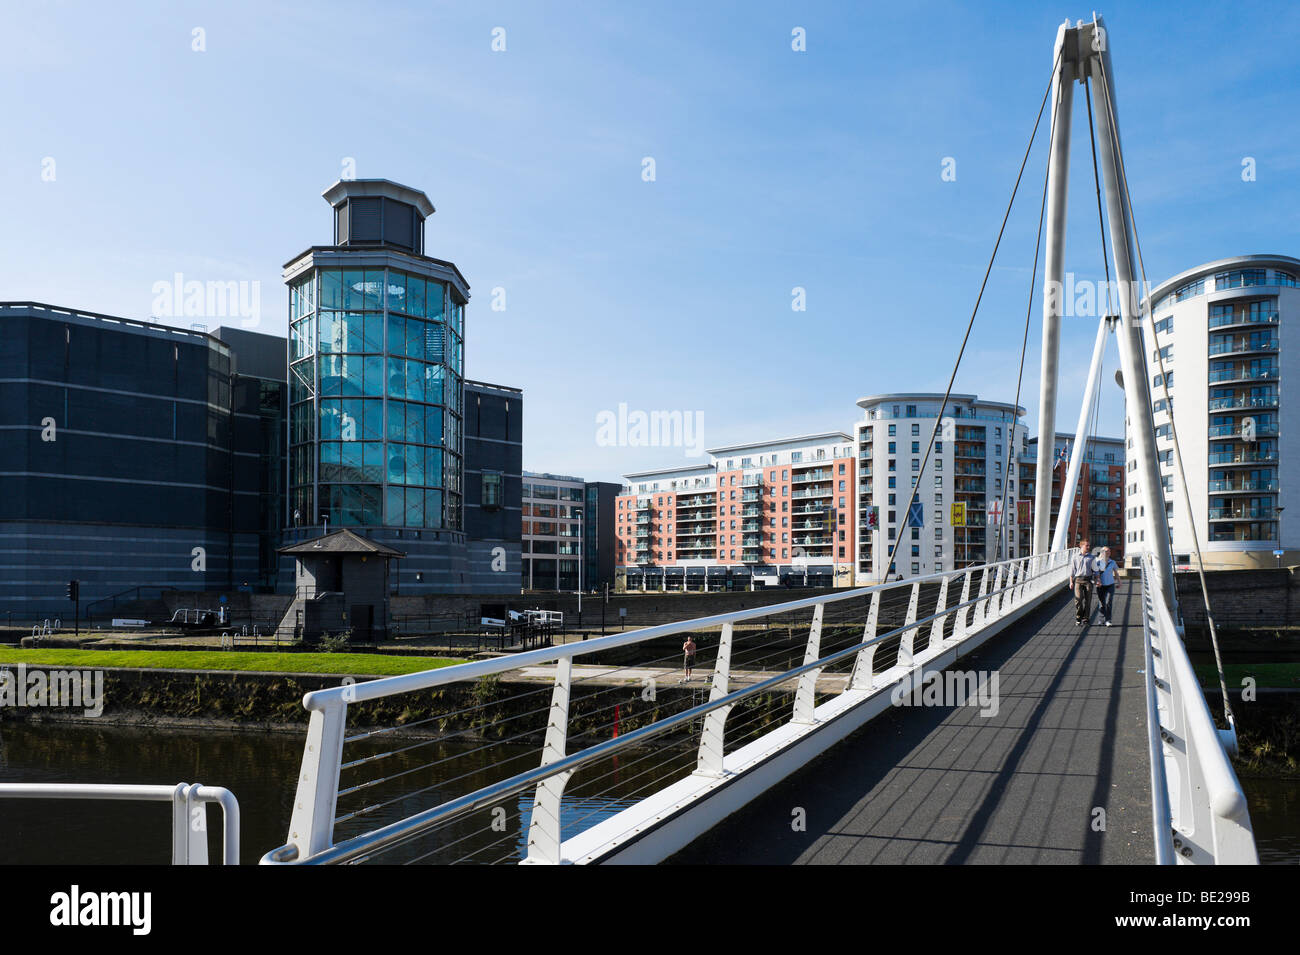 Il Royal Armouries Museum sulle rive del fiume Aire, Clarence Dock, Leeds, West Yorkshire, Inghilterra Foto Stock